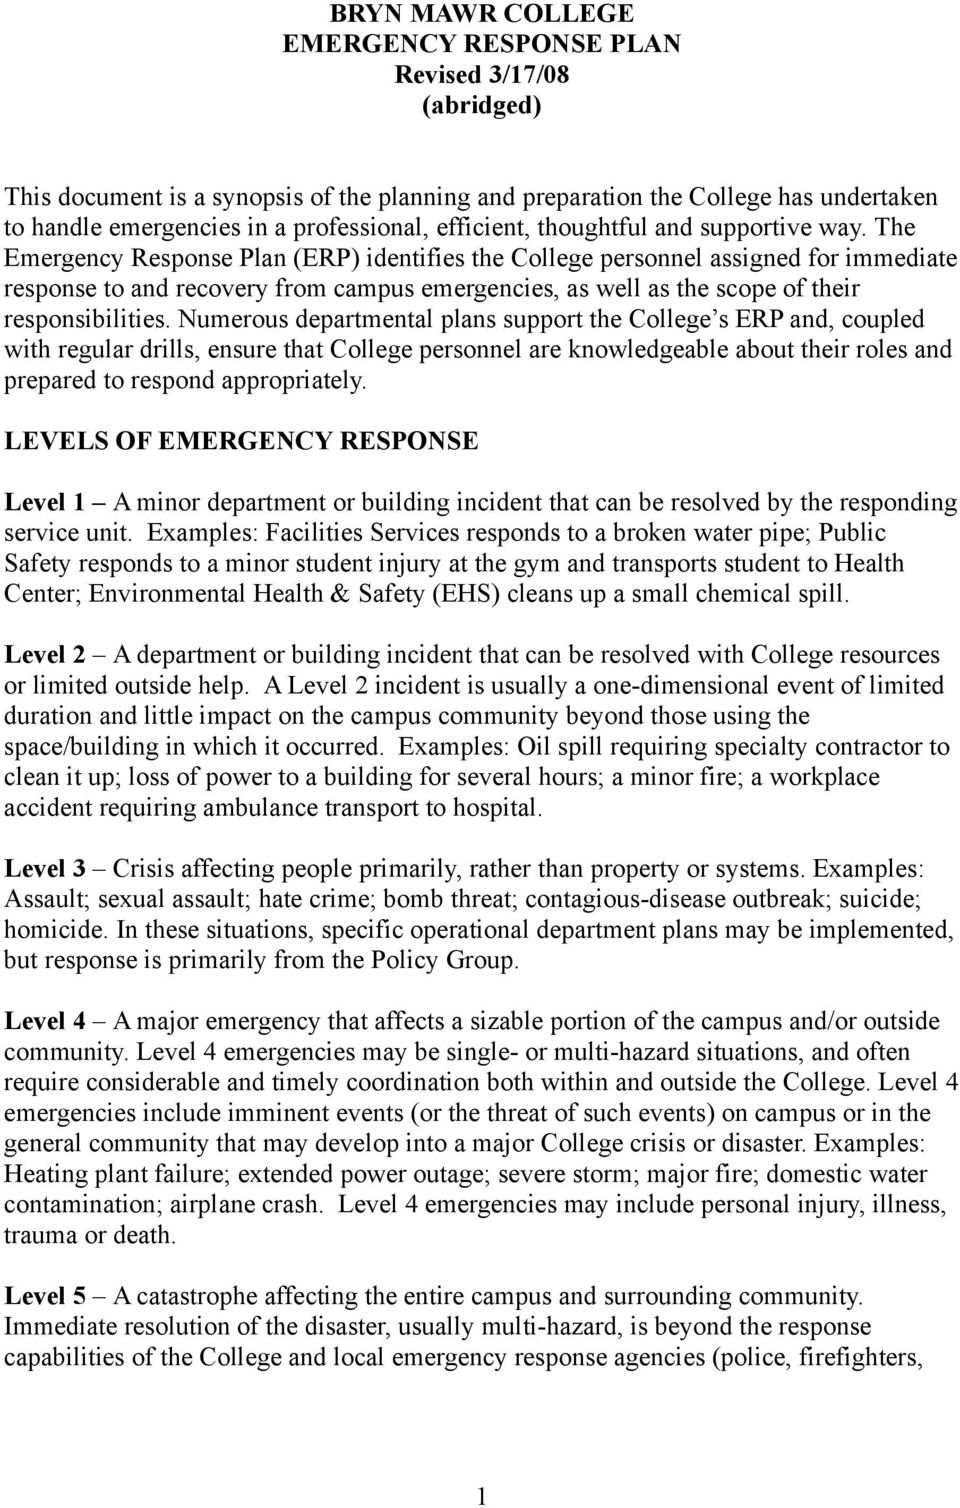 The Emergency Response Plan (ERP) identifies the College personnel assigned for immediate response to and recovery from campus emergencies, as well as the scope of their responsibilities.